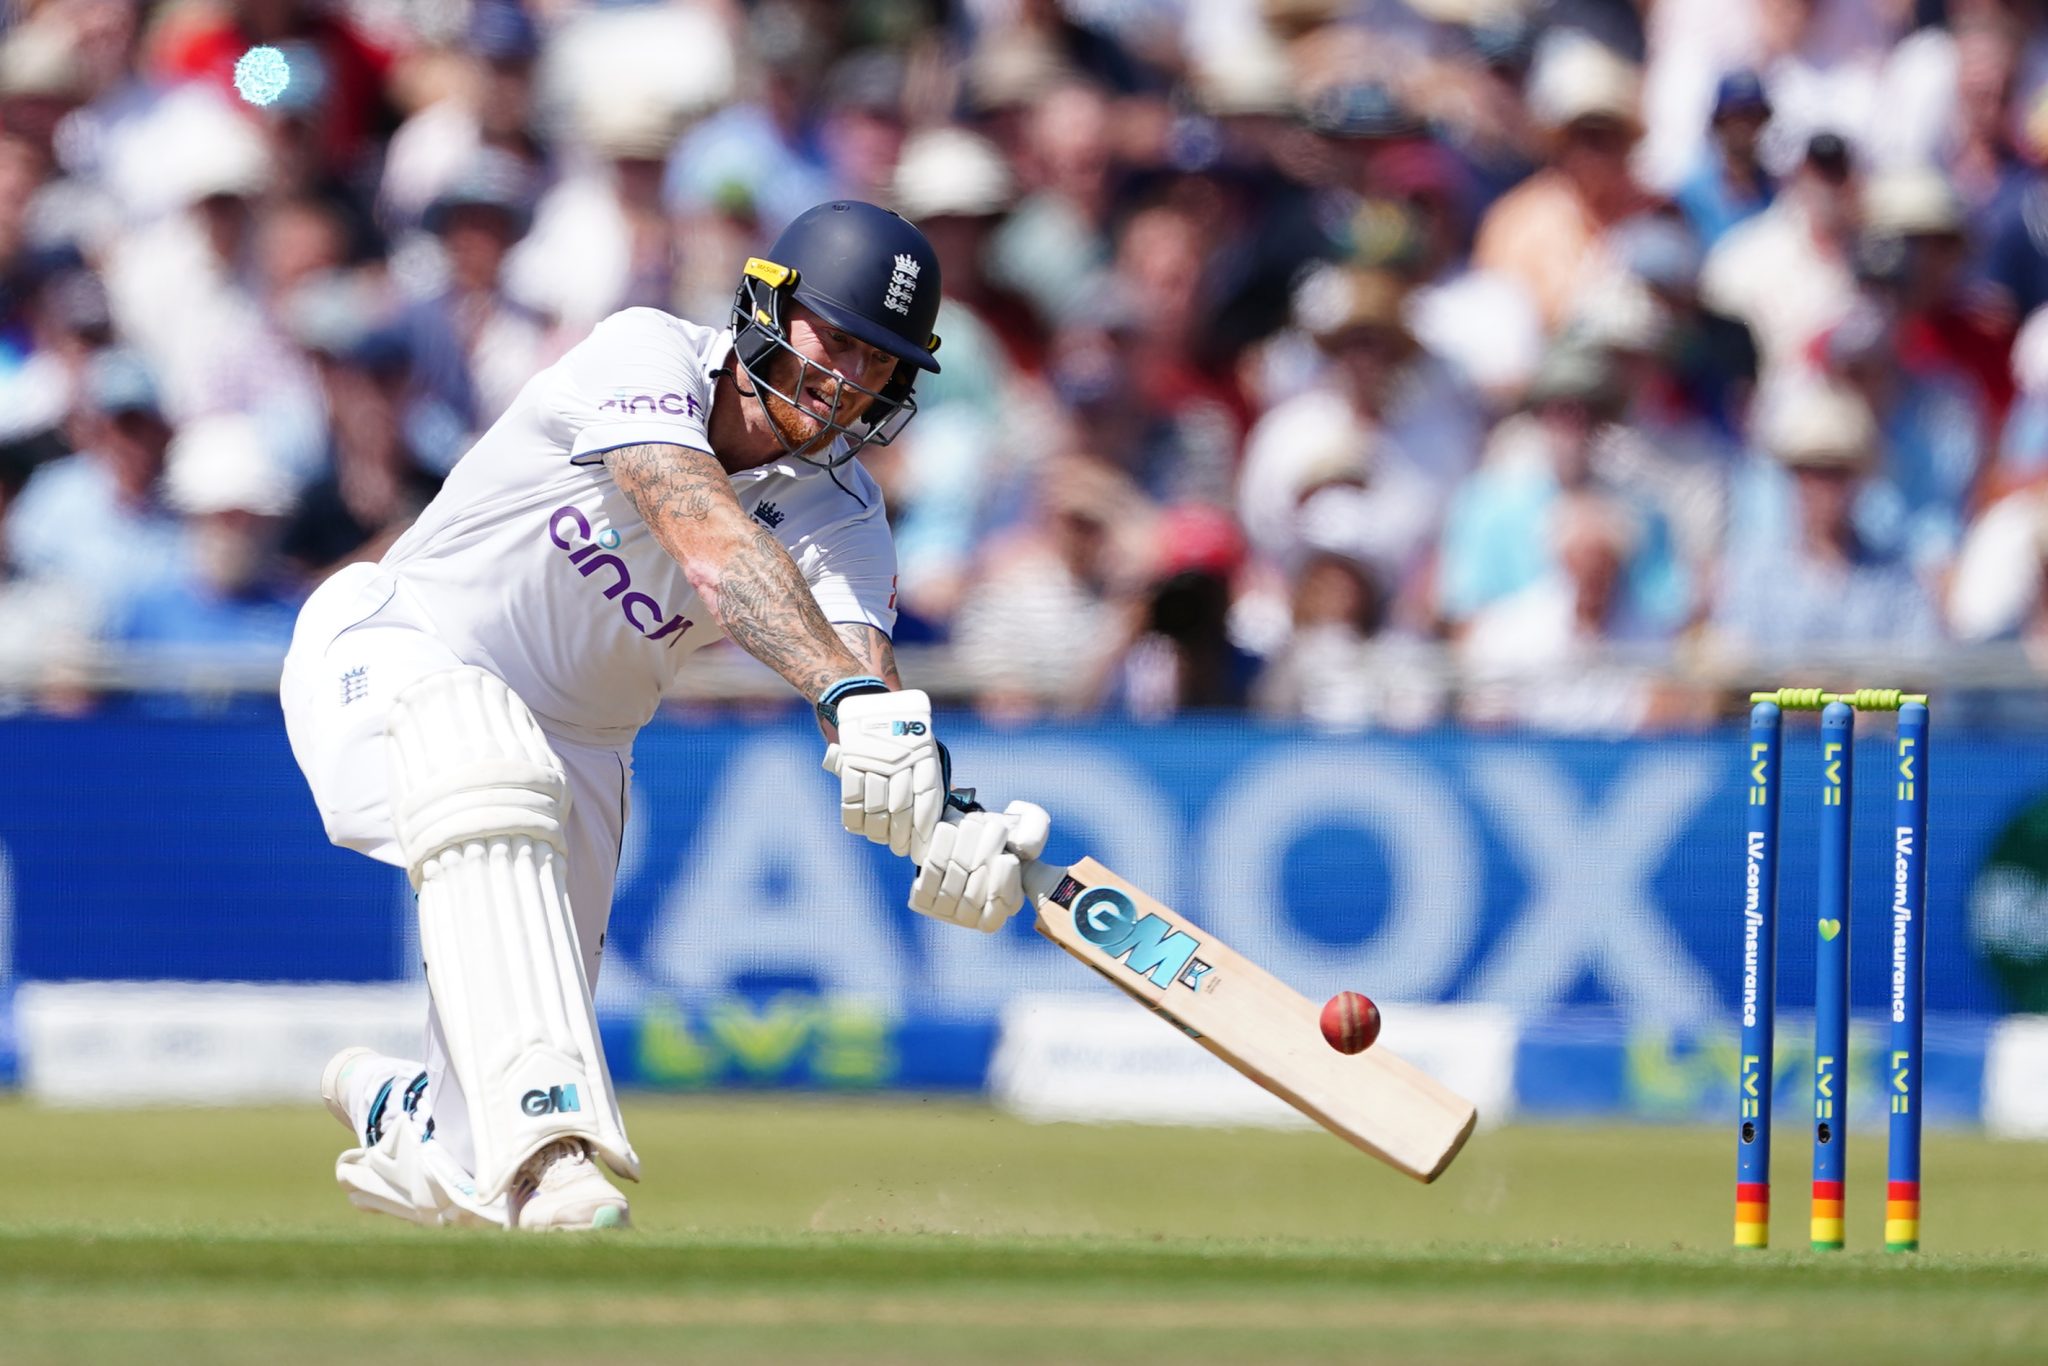 Ben Stokes defiance keeps England in contention in third Ashes Test